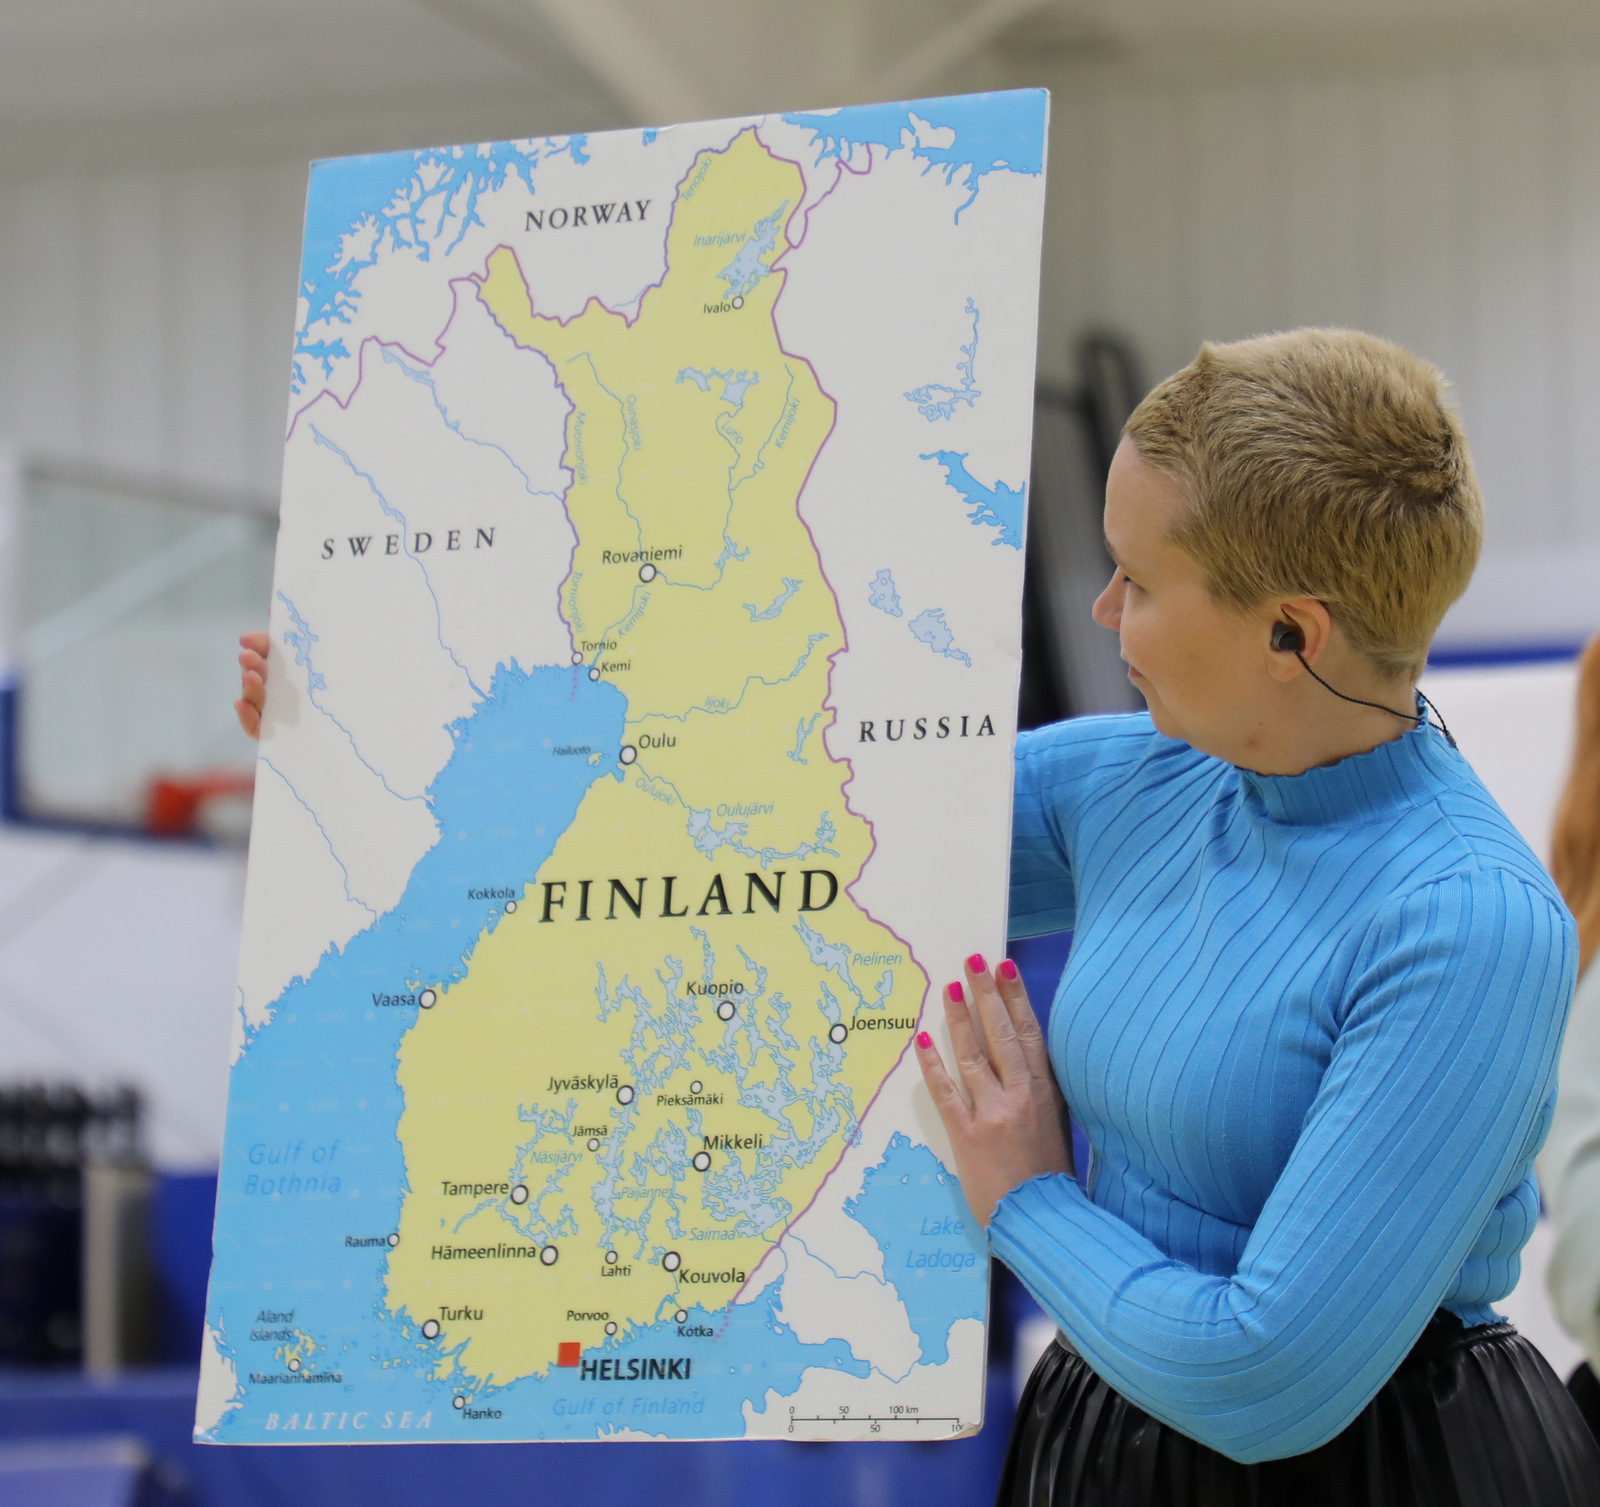 A woman holds up a large map of Finland